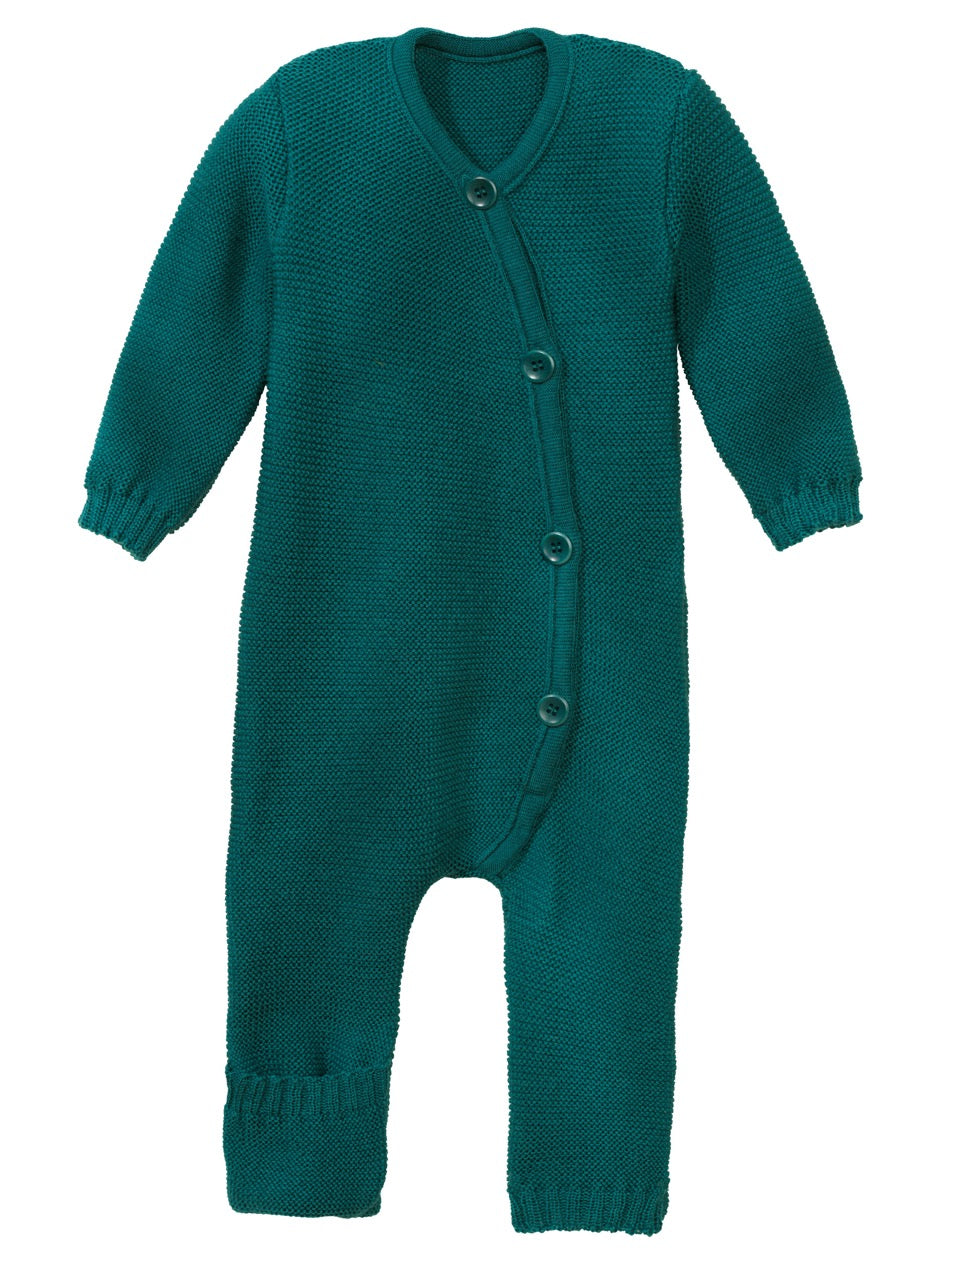 Disana knitted overall in pacific. Made of 100% organic soft merino wool.